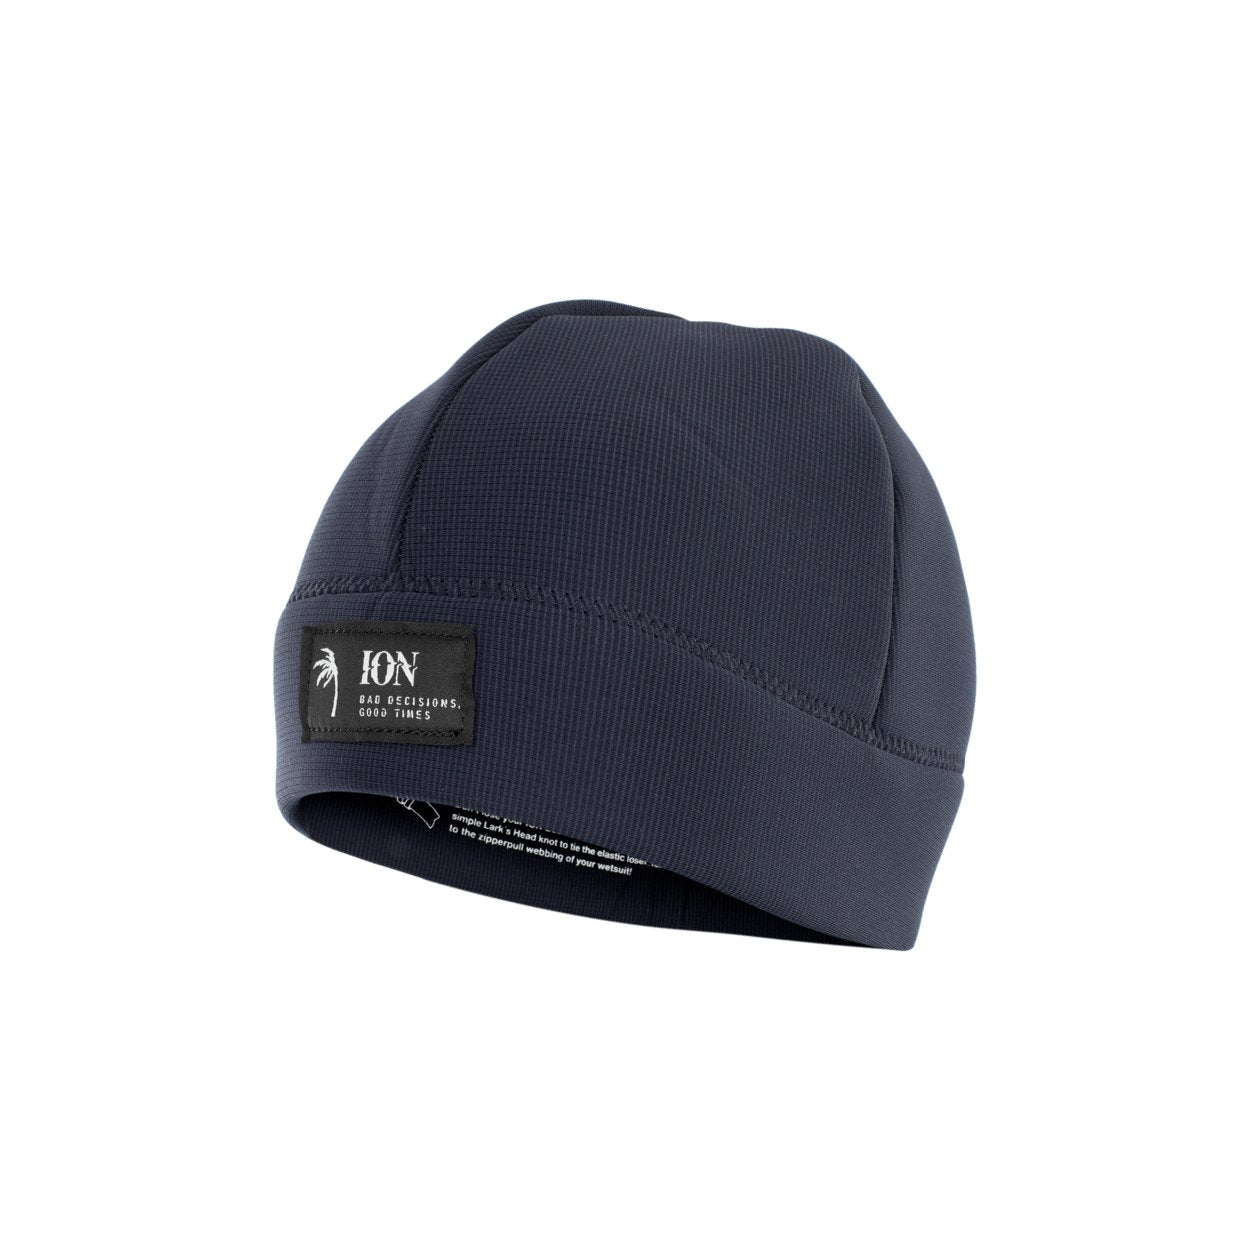 ION TEC Beanie 2022 - Worthing Watersports - 9008415956418 - Neo Accessories - ION Water